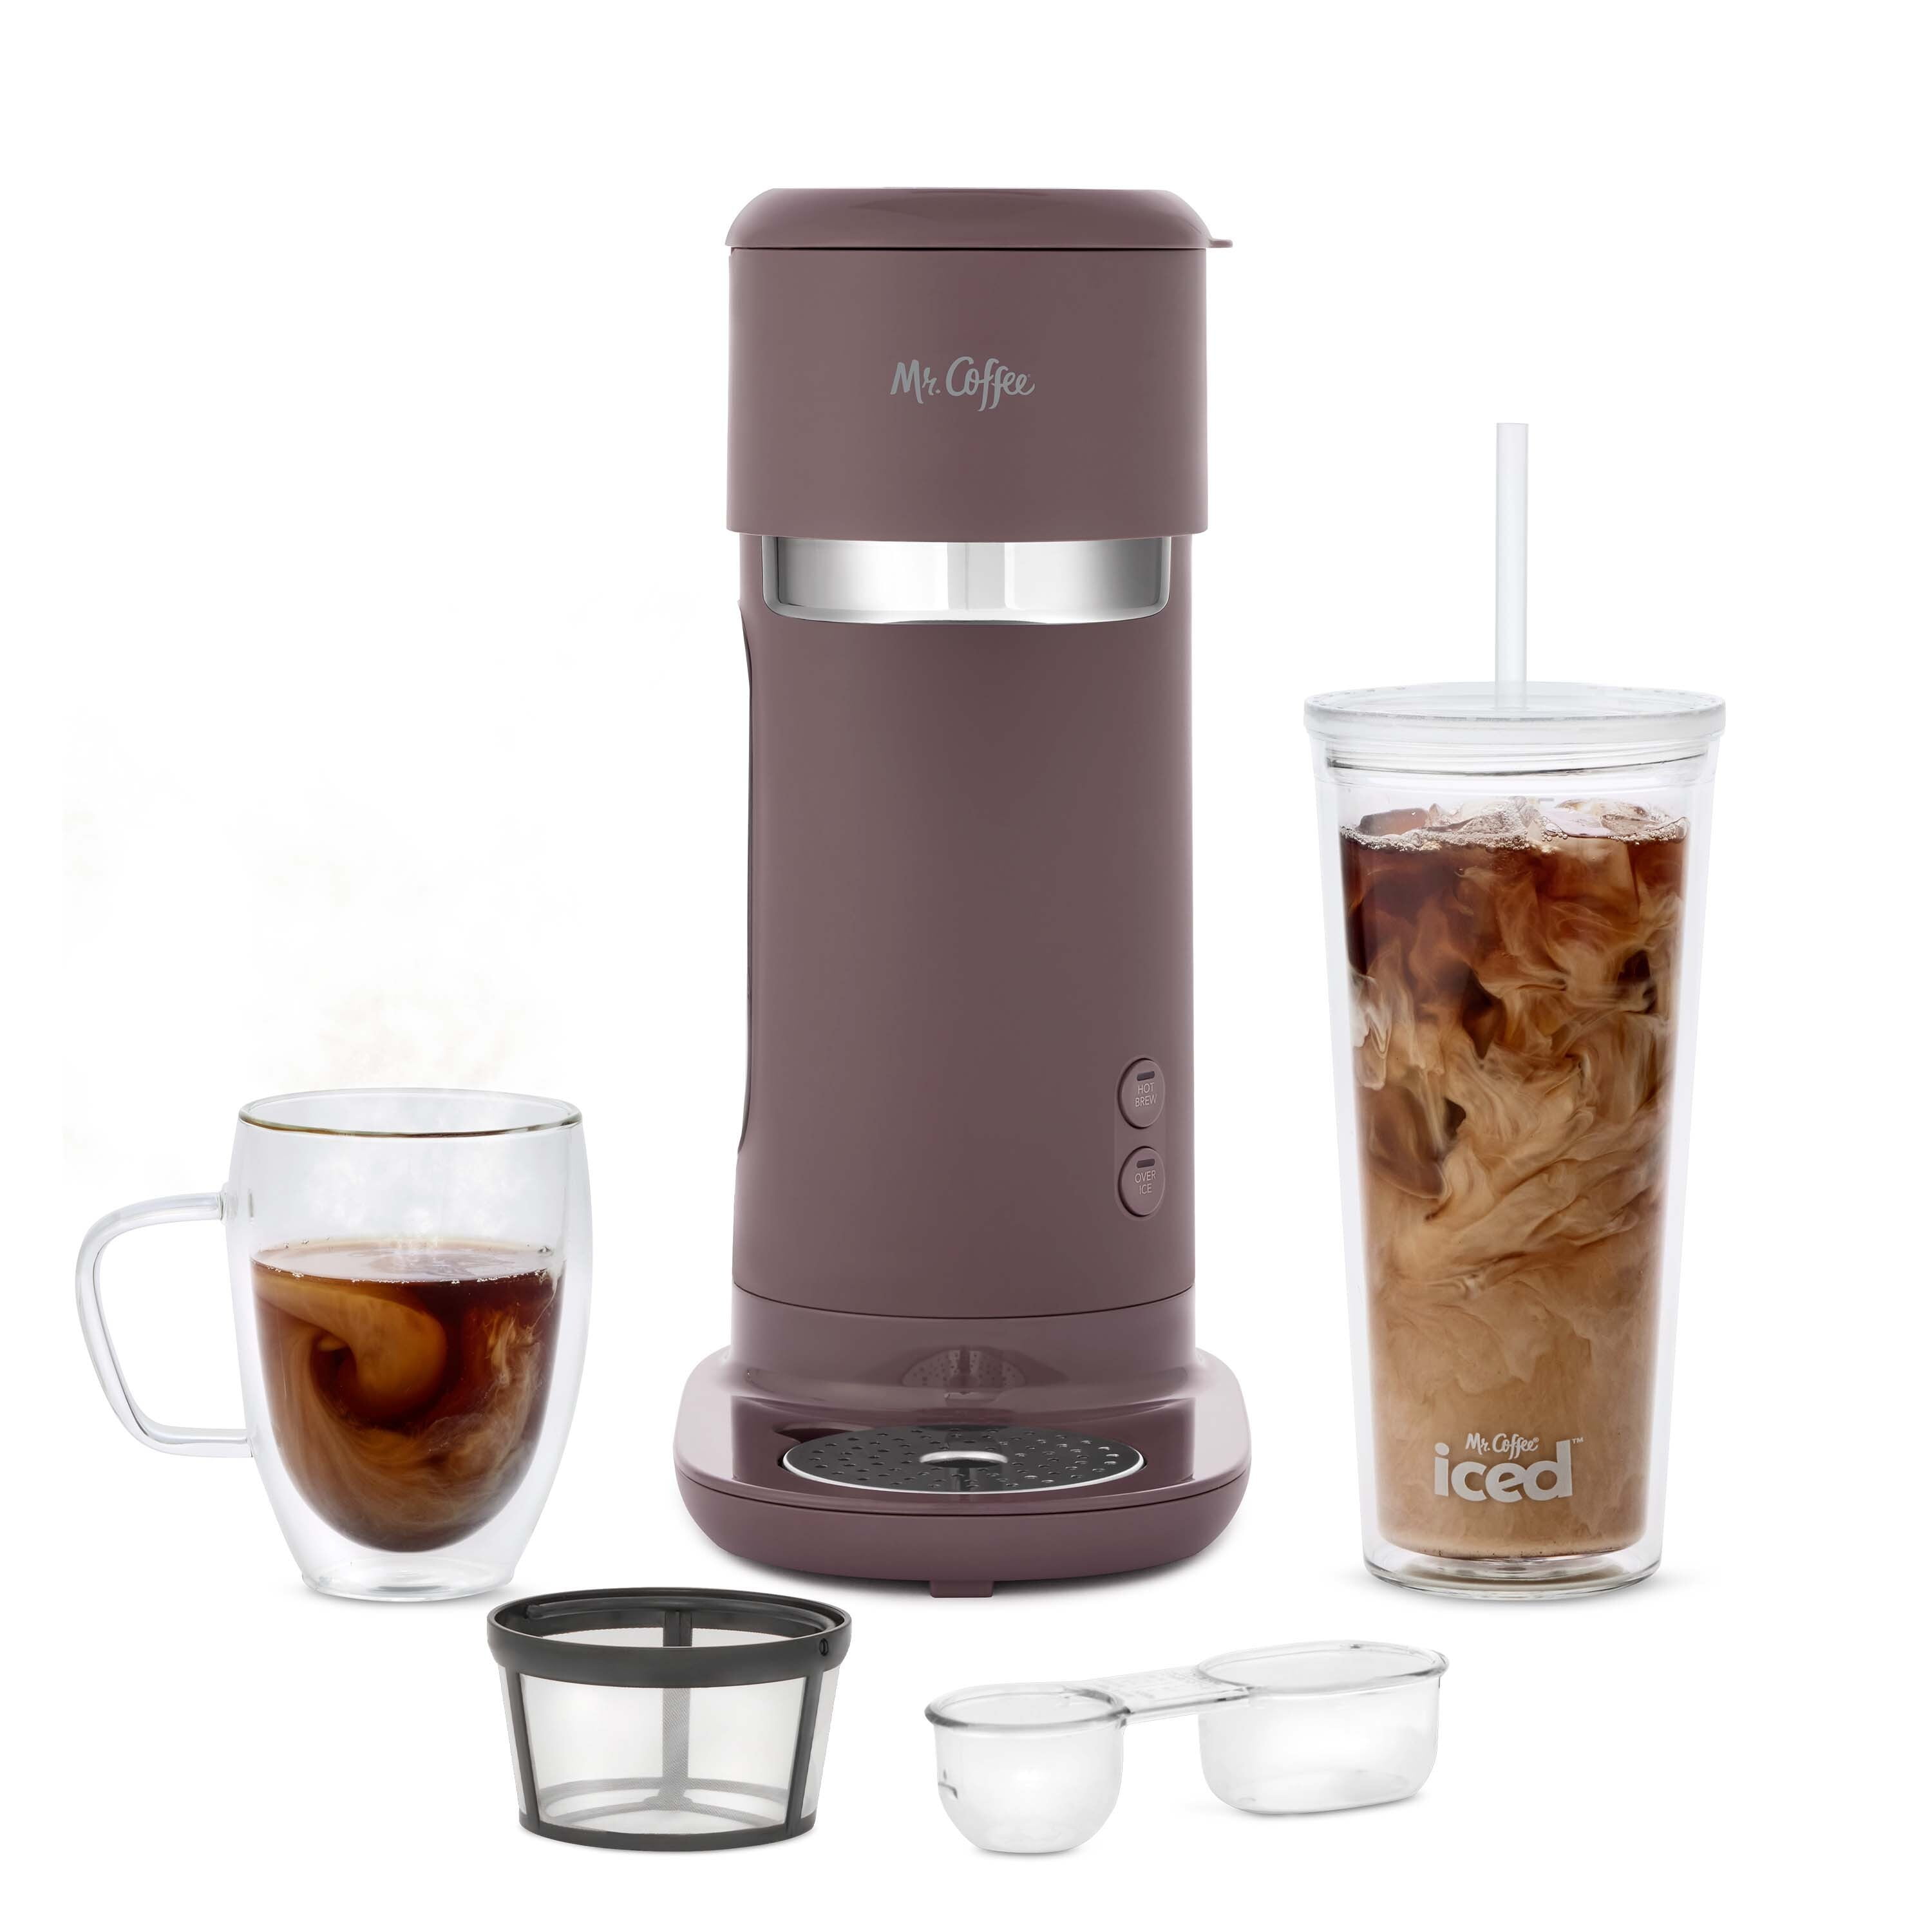 This iced and hot coffee maker by Mr. Coffee has 4-in-1 functionality